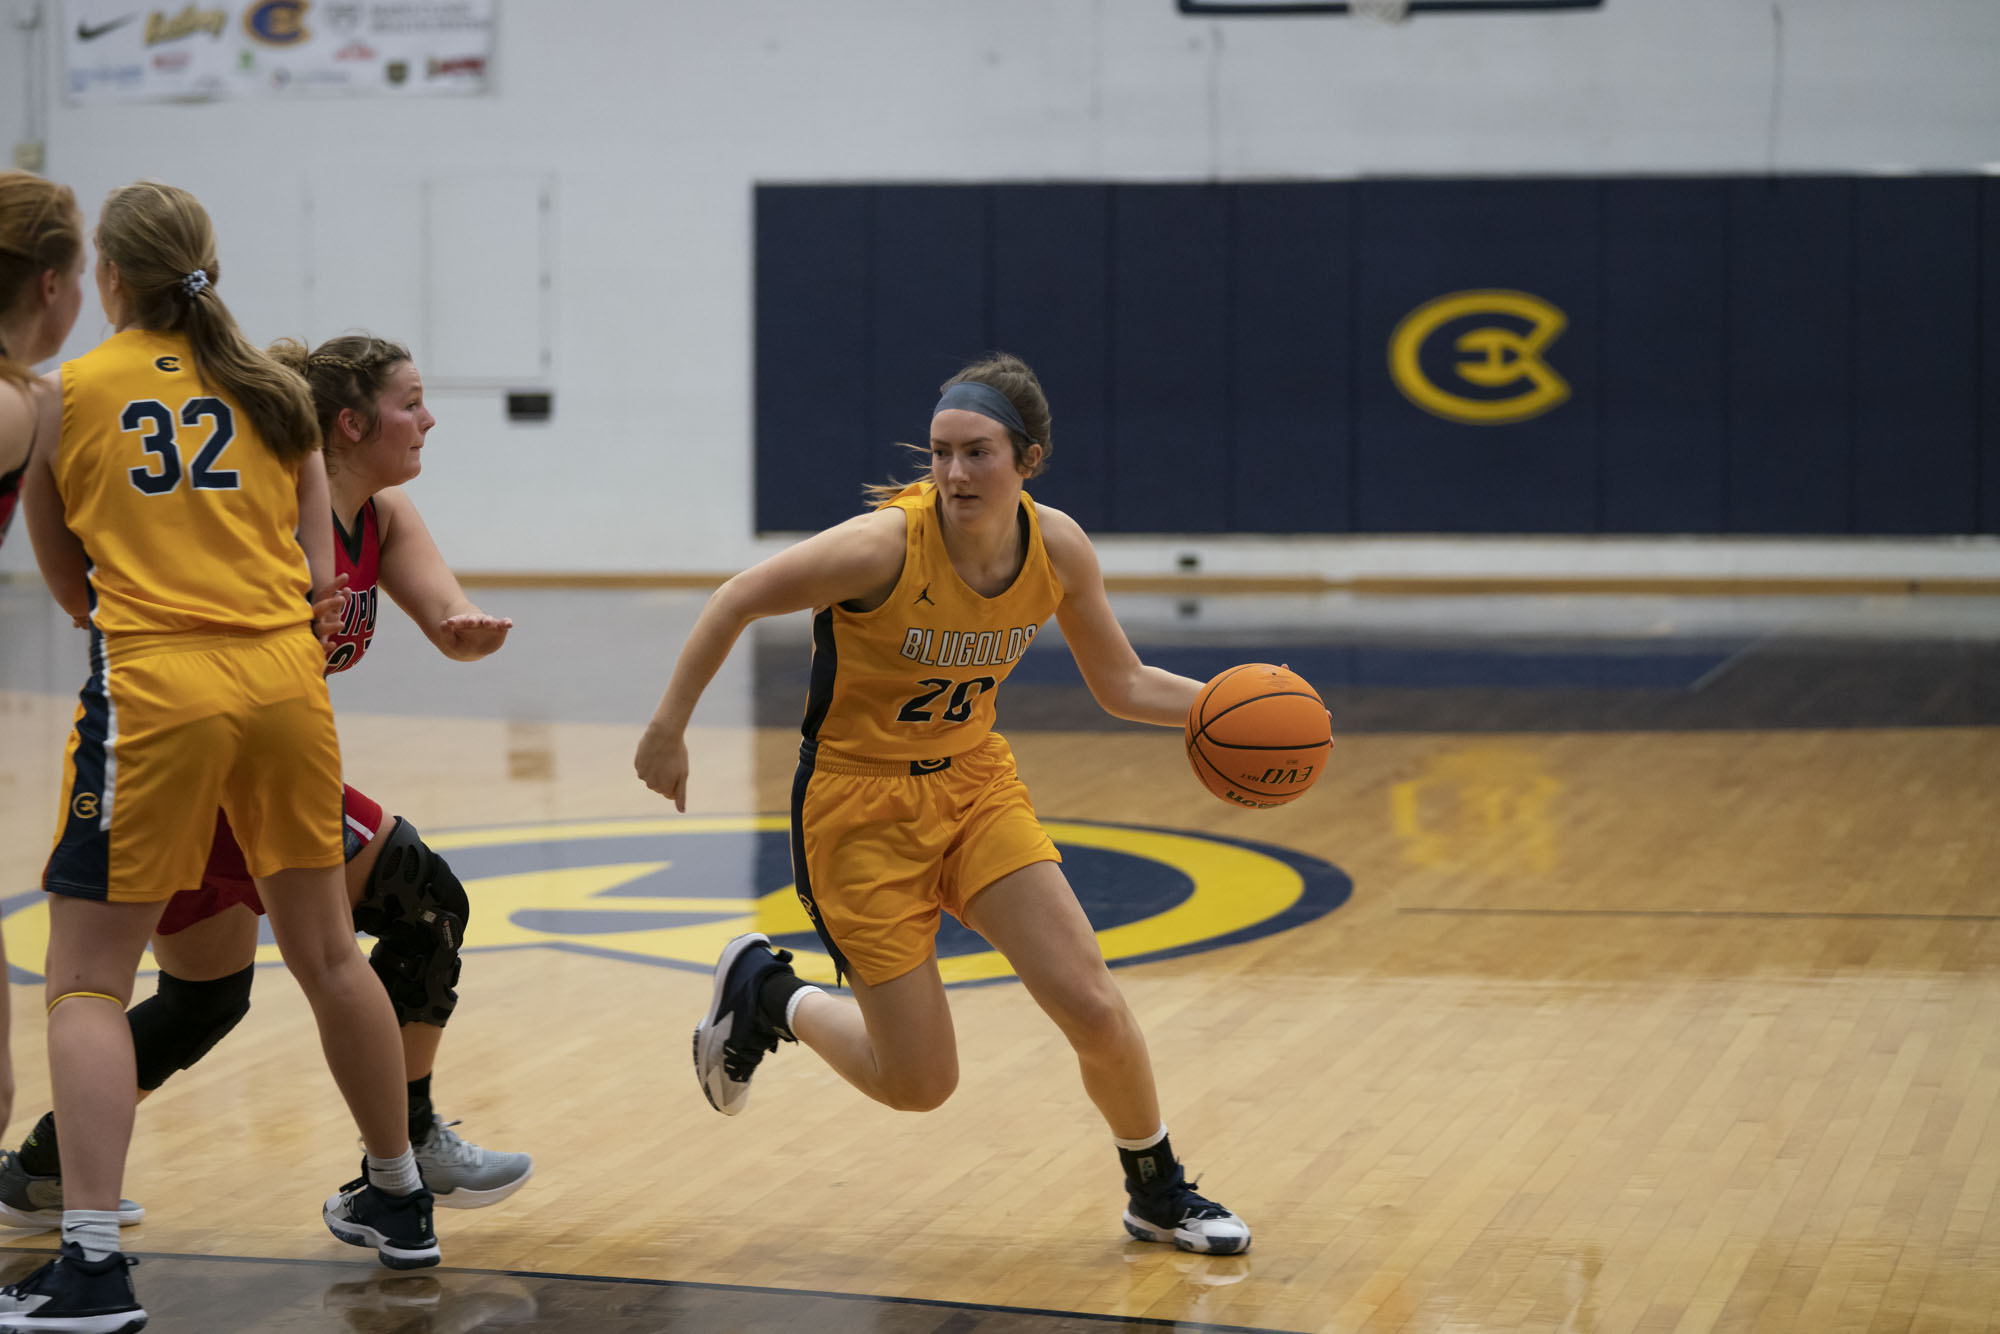 Women's Basketball Storms Past No. 3 Trine in Upset at Home